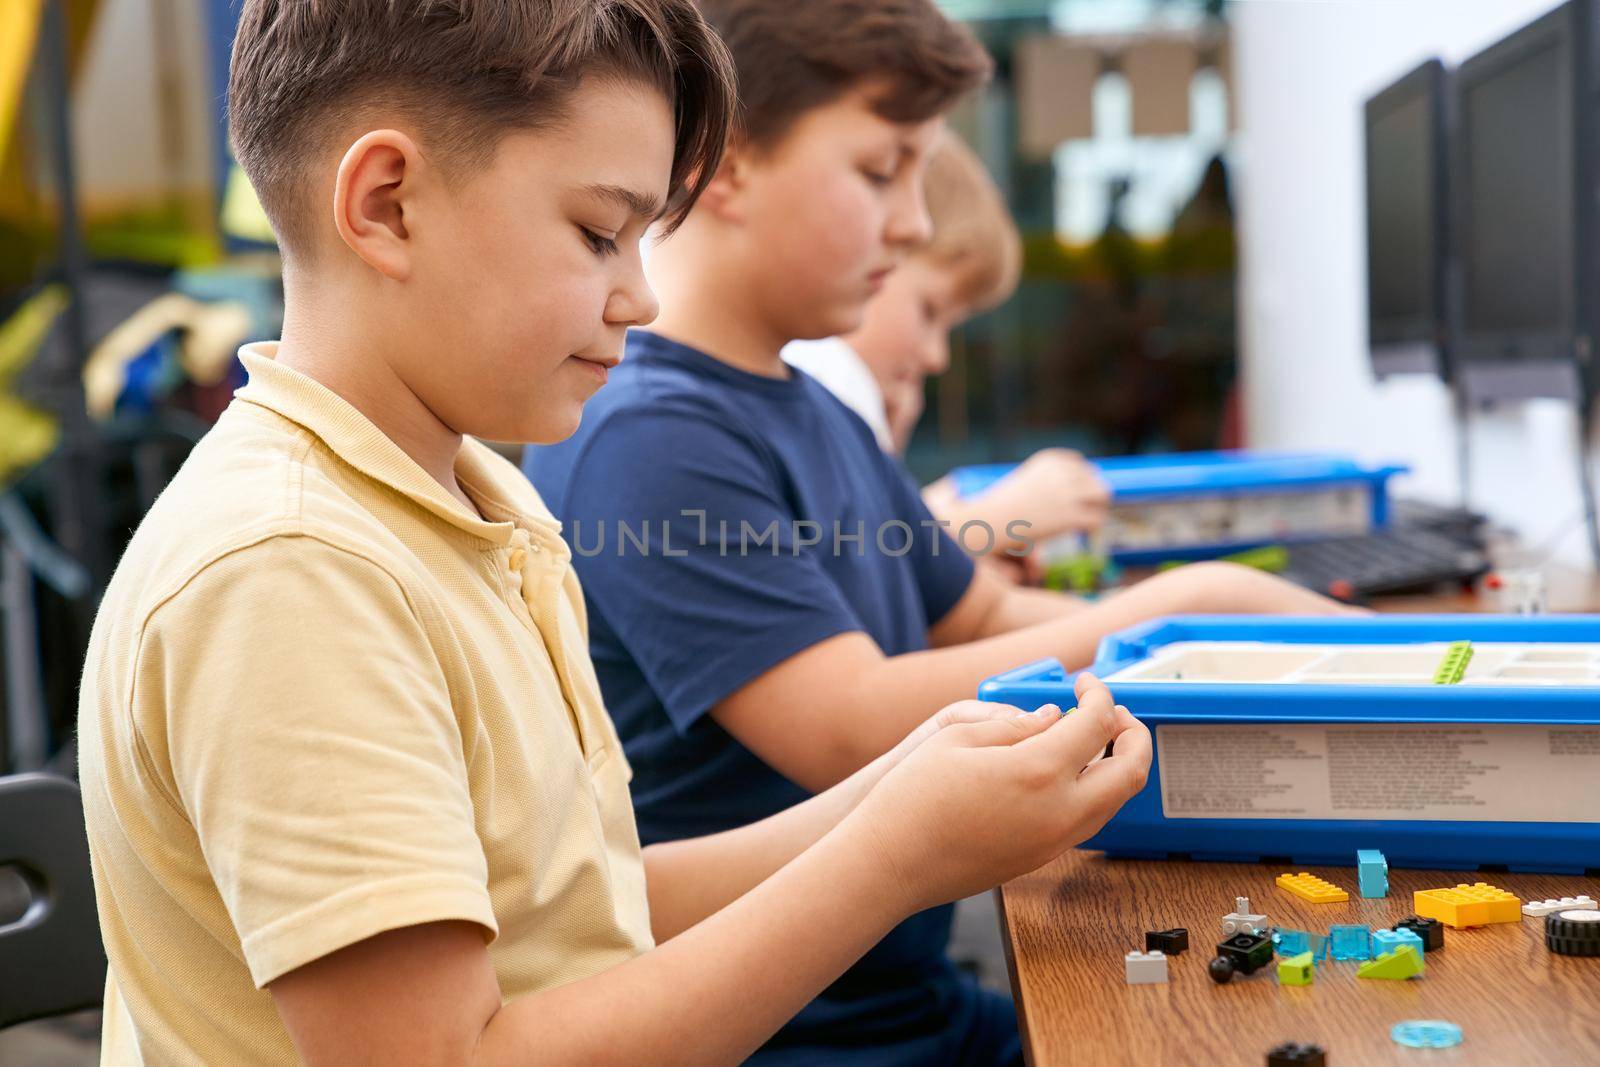 Interesting building kit for kids on table with computers. Side view of boys creating toys. Science engineering. Nice interested friends chatting and working on project together.